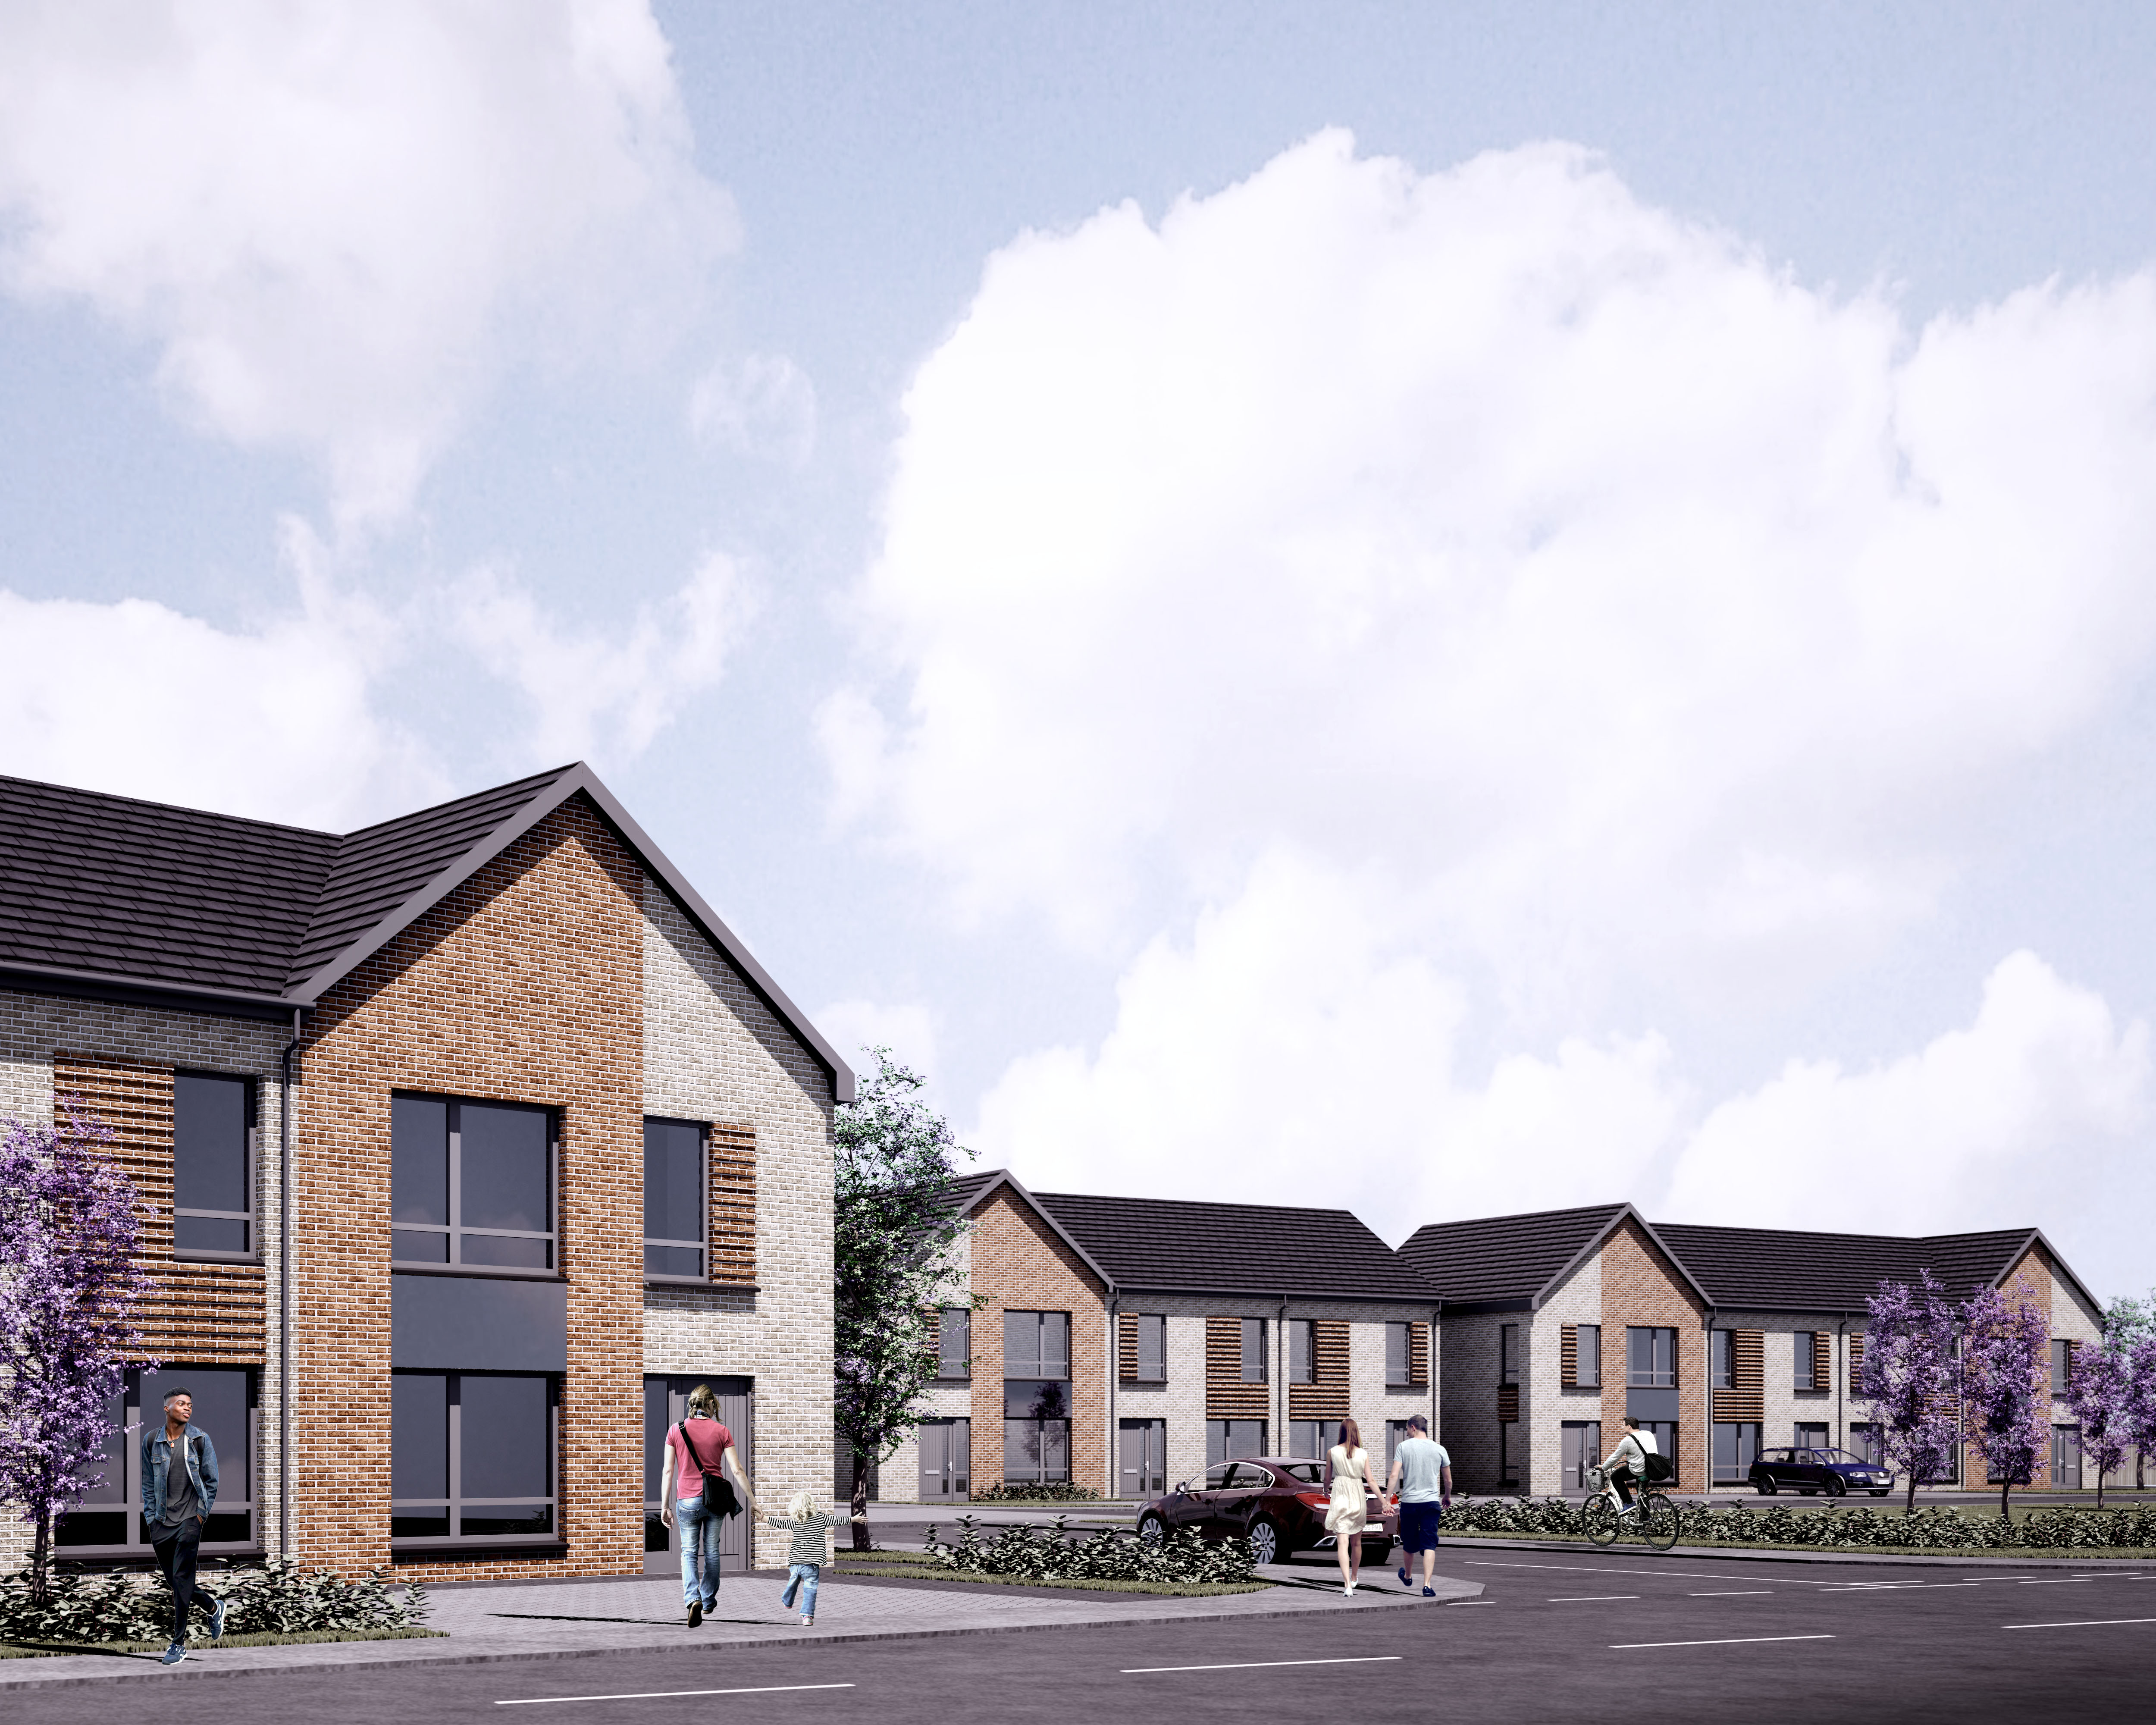 Housing association submits plans for 131 affordable homes in Paisley